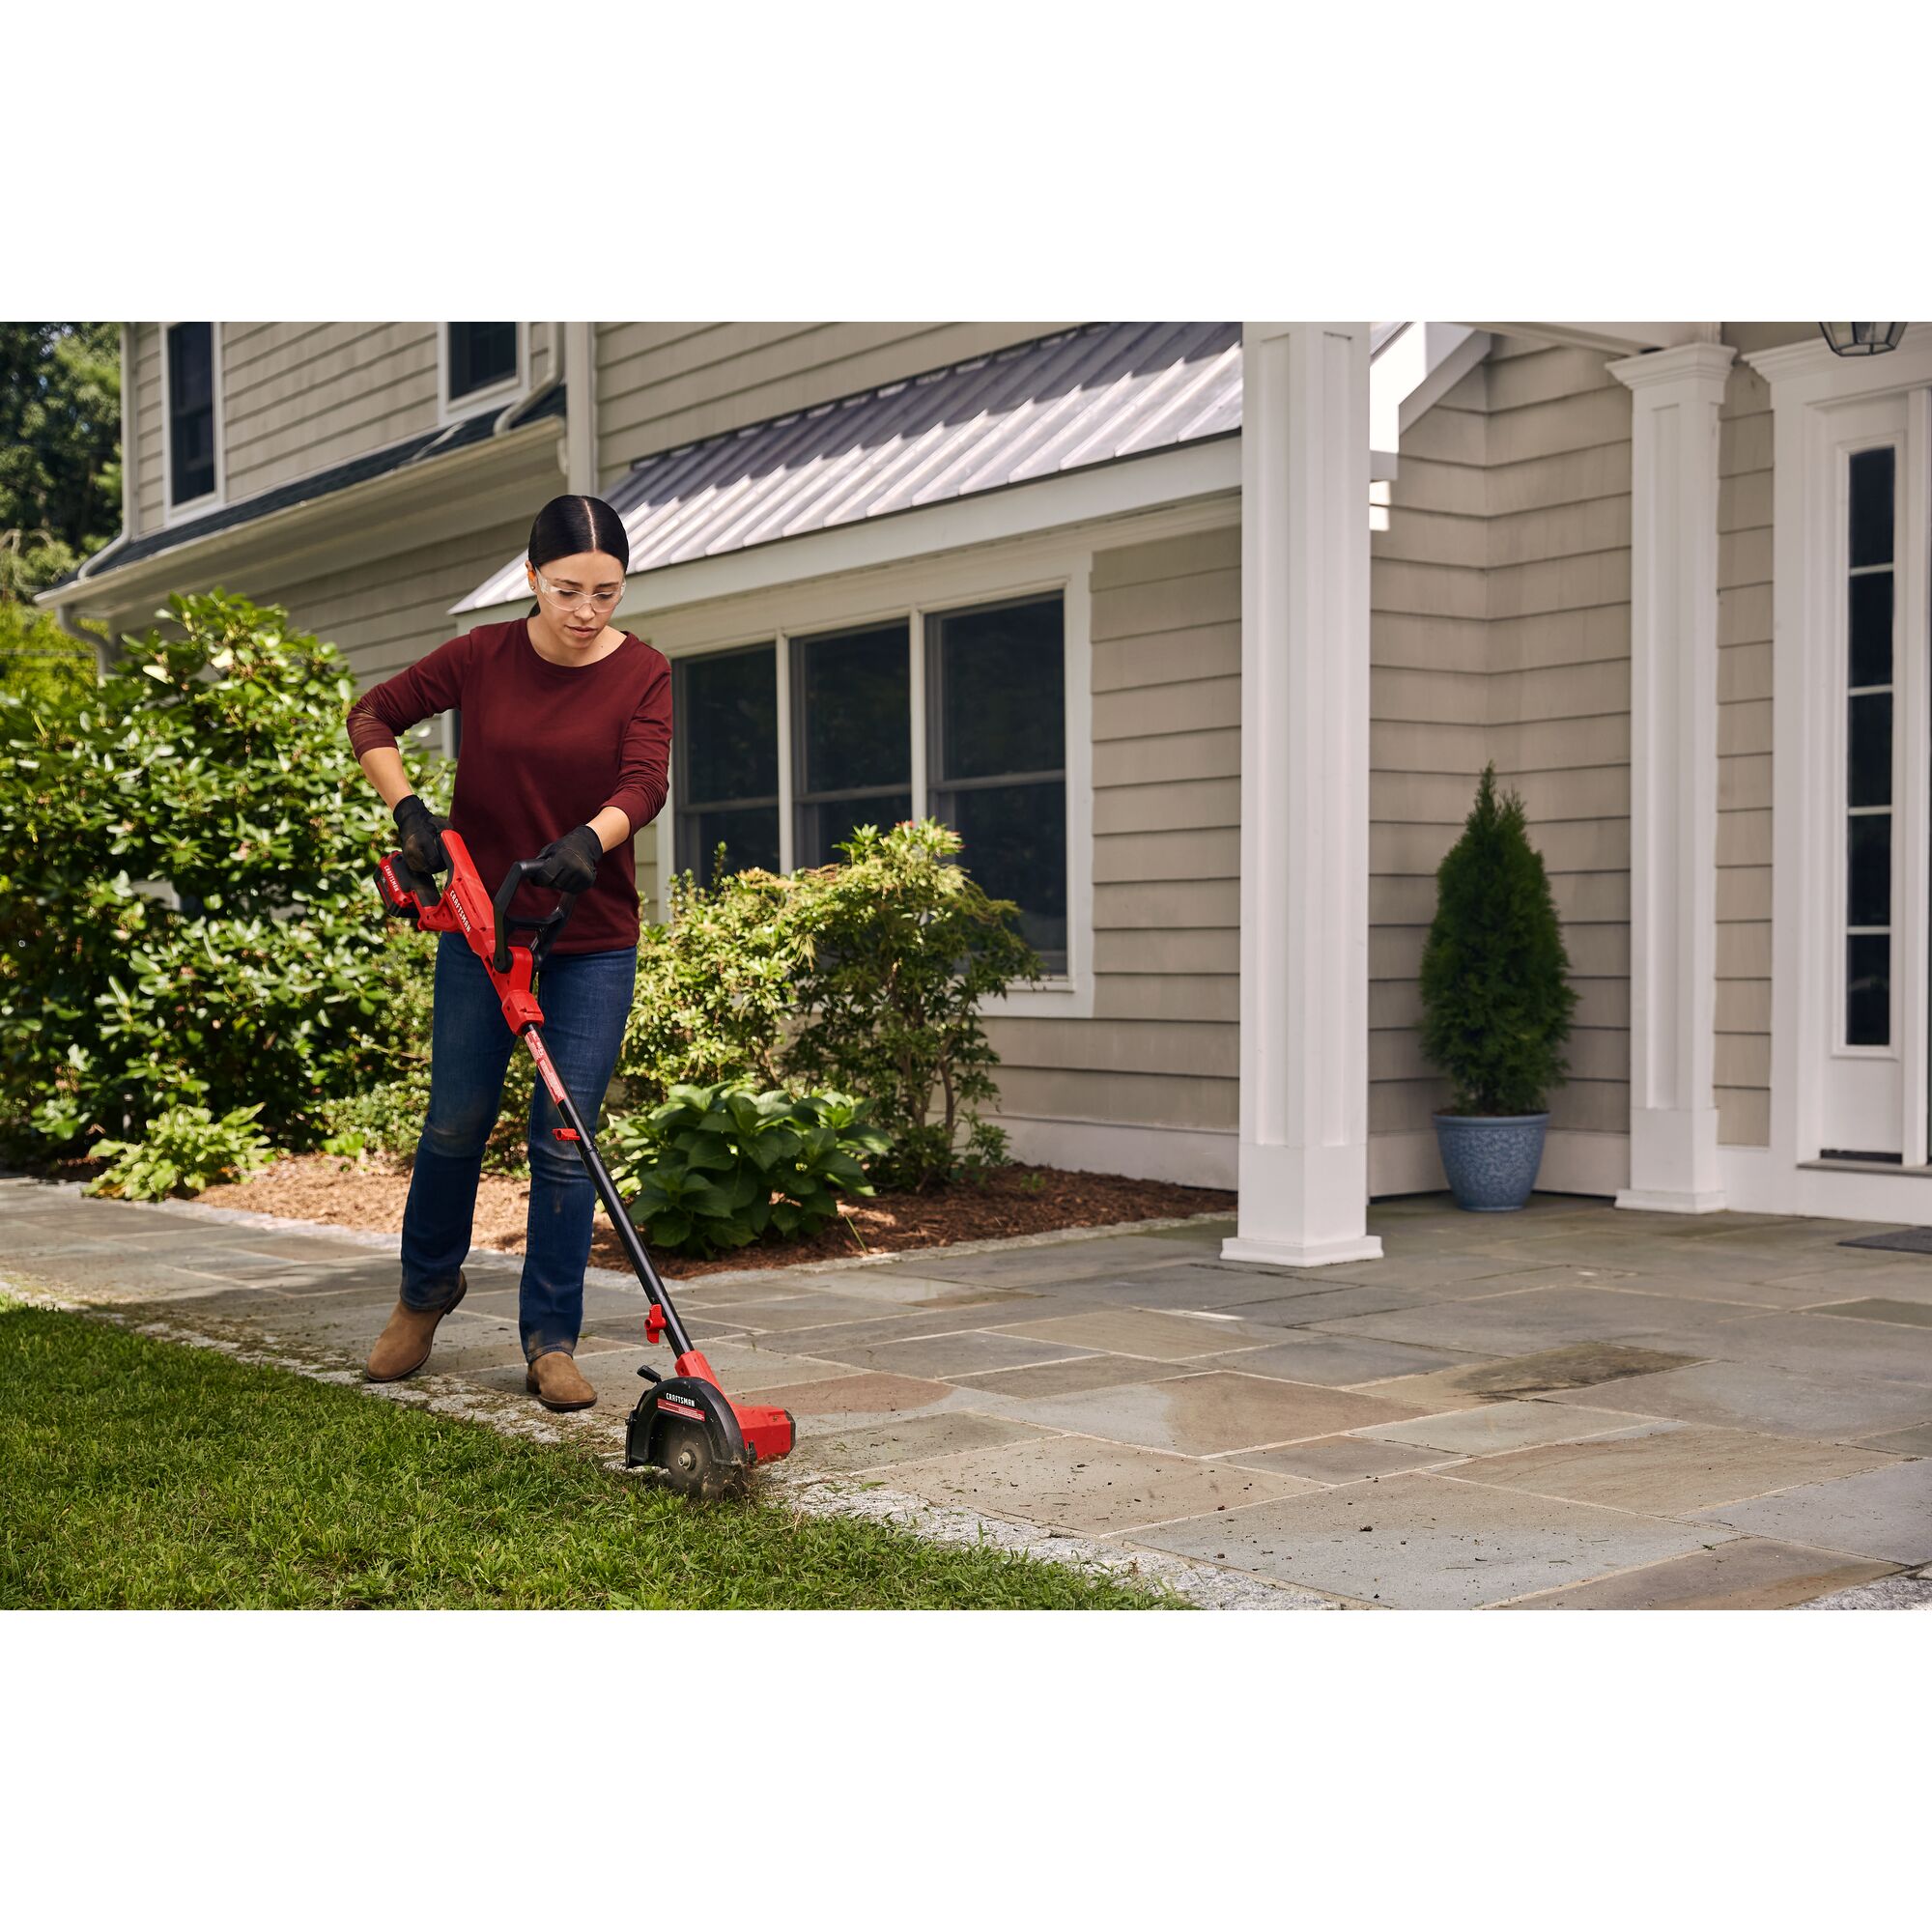 Cordless edger tool only being used for edging lawn by person.